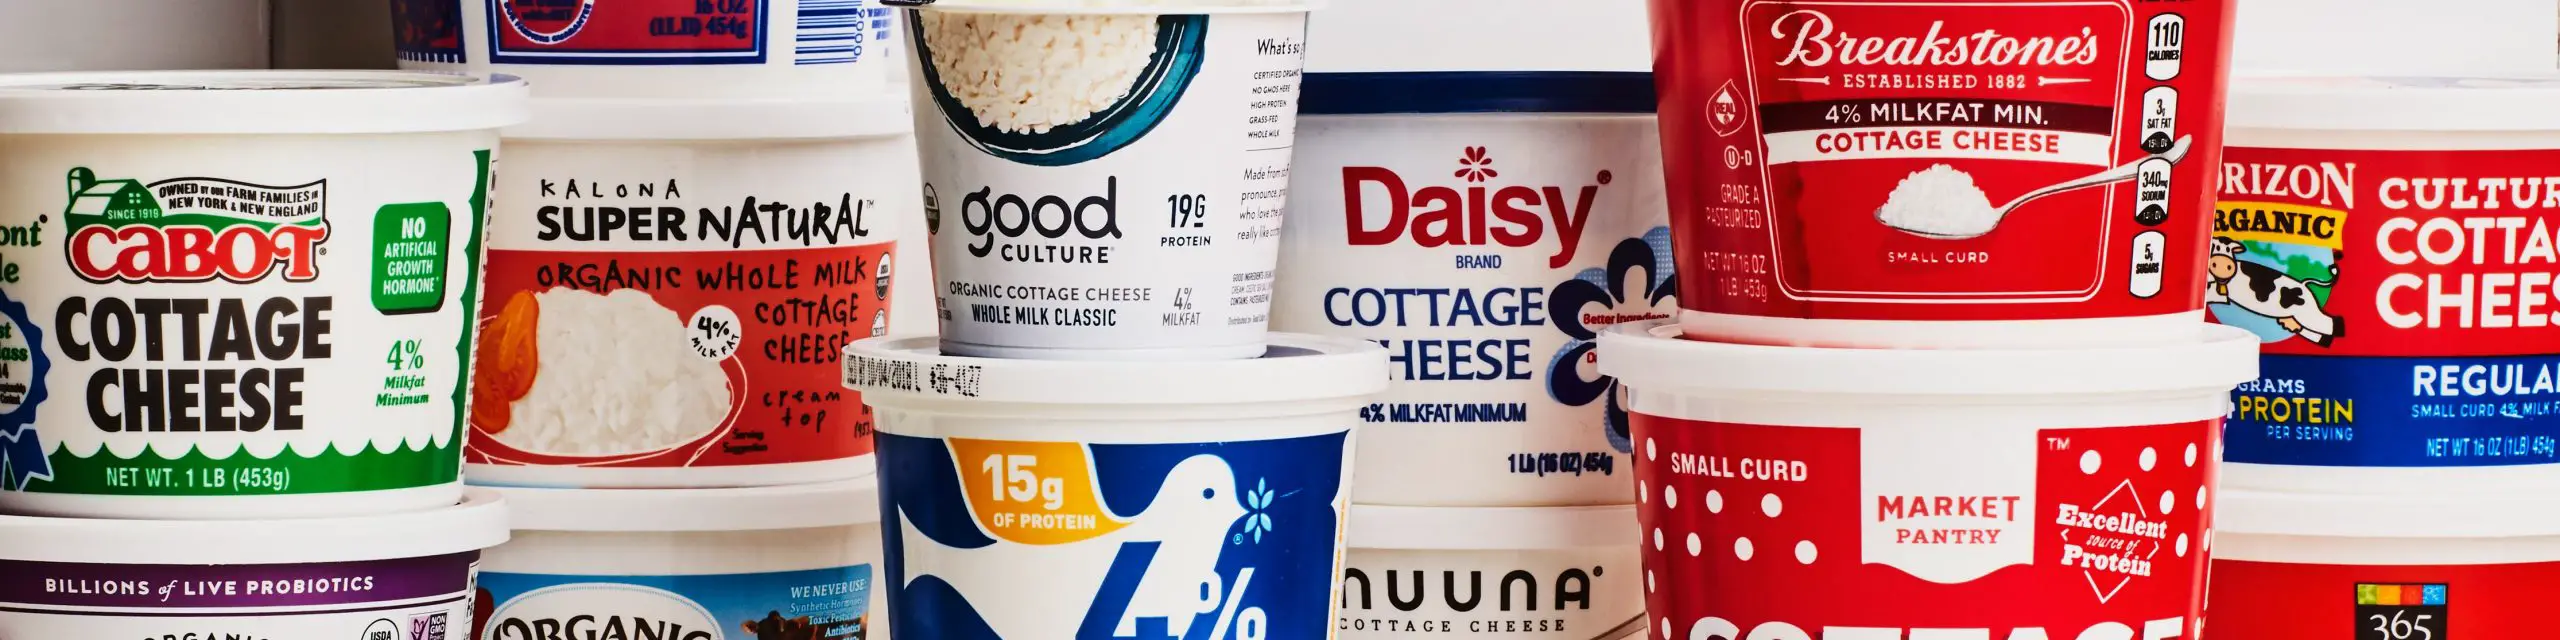 Best Cottage Cheese Brand ~ The Vibrant Cottage